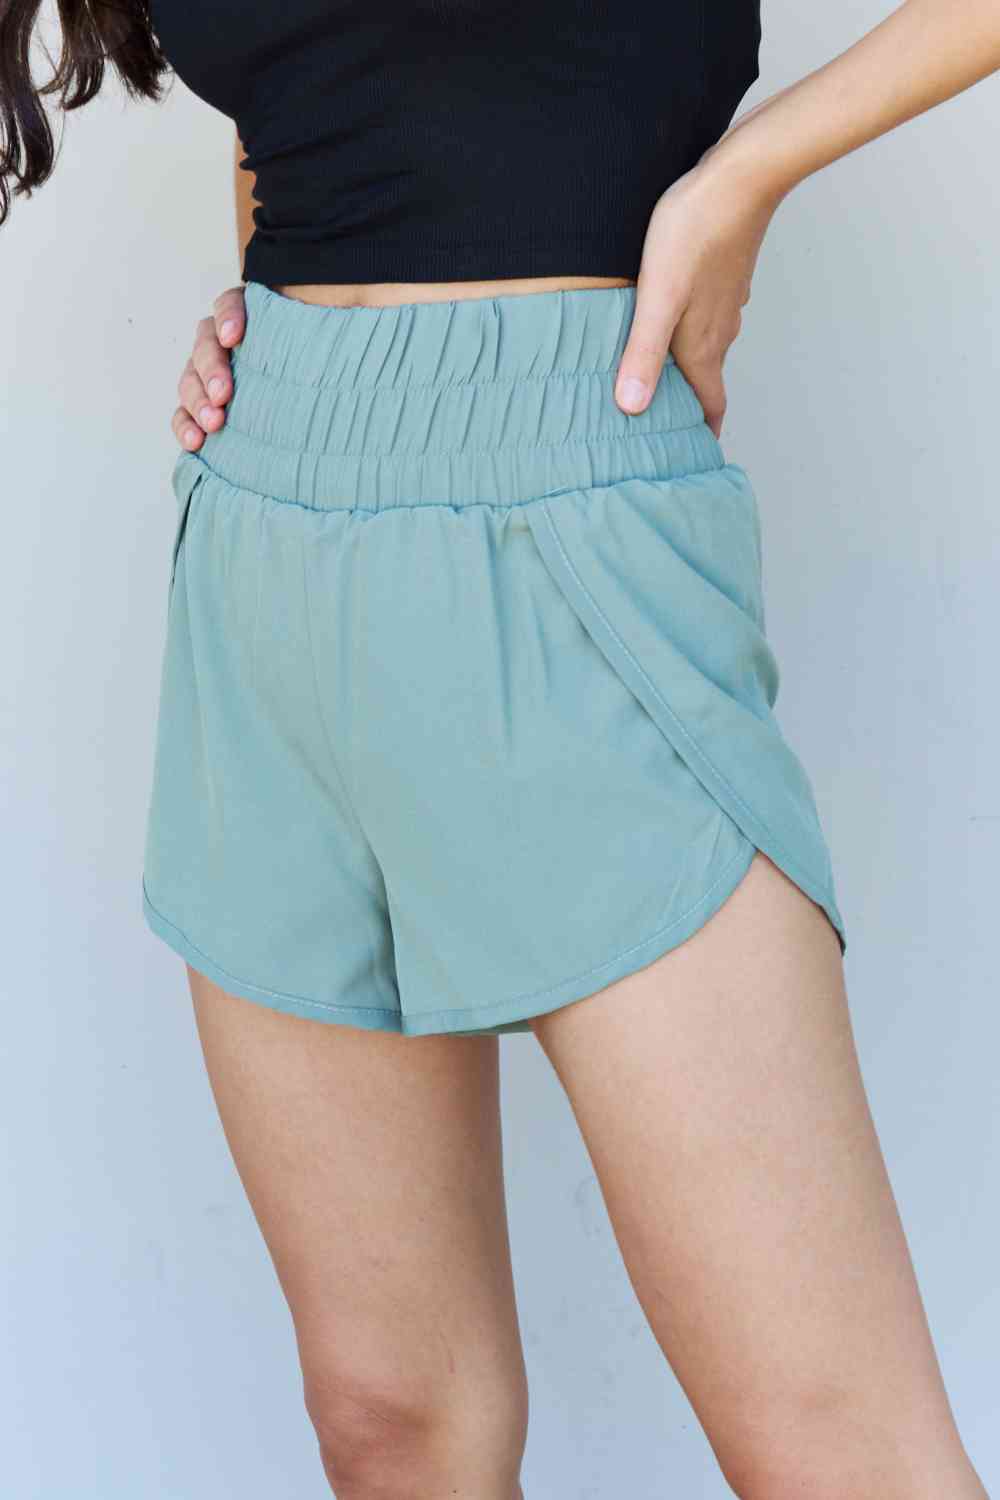 Ninexis Stay Active High Waistband Active Shorts in Pastel Blue - AllIn Computer